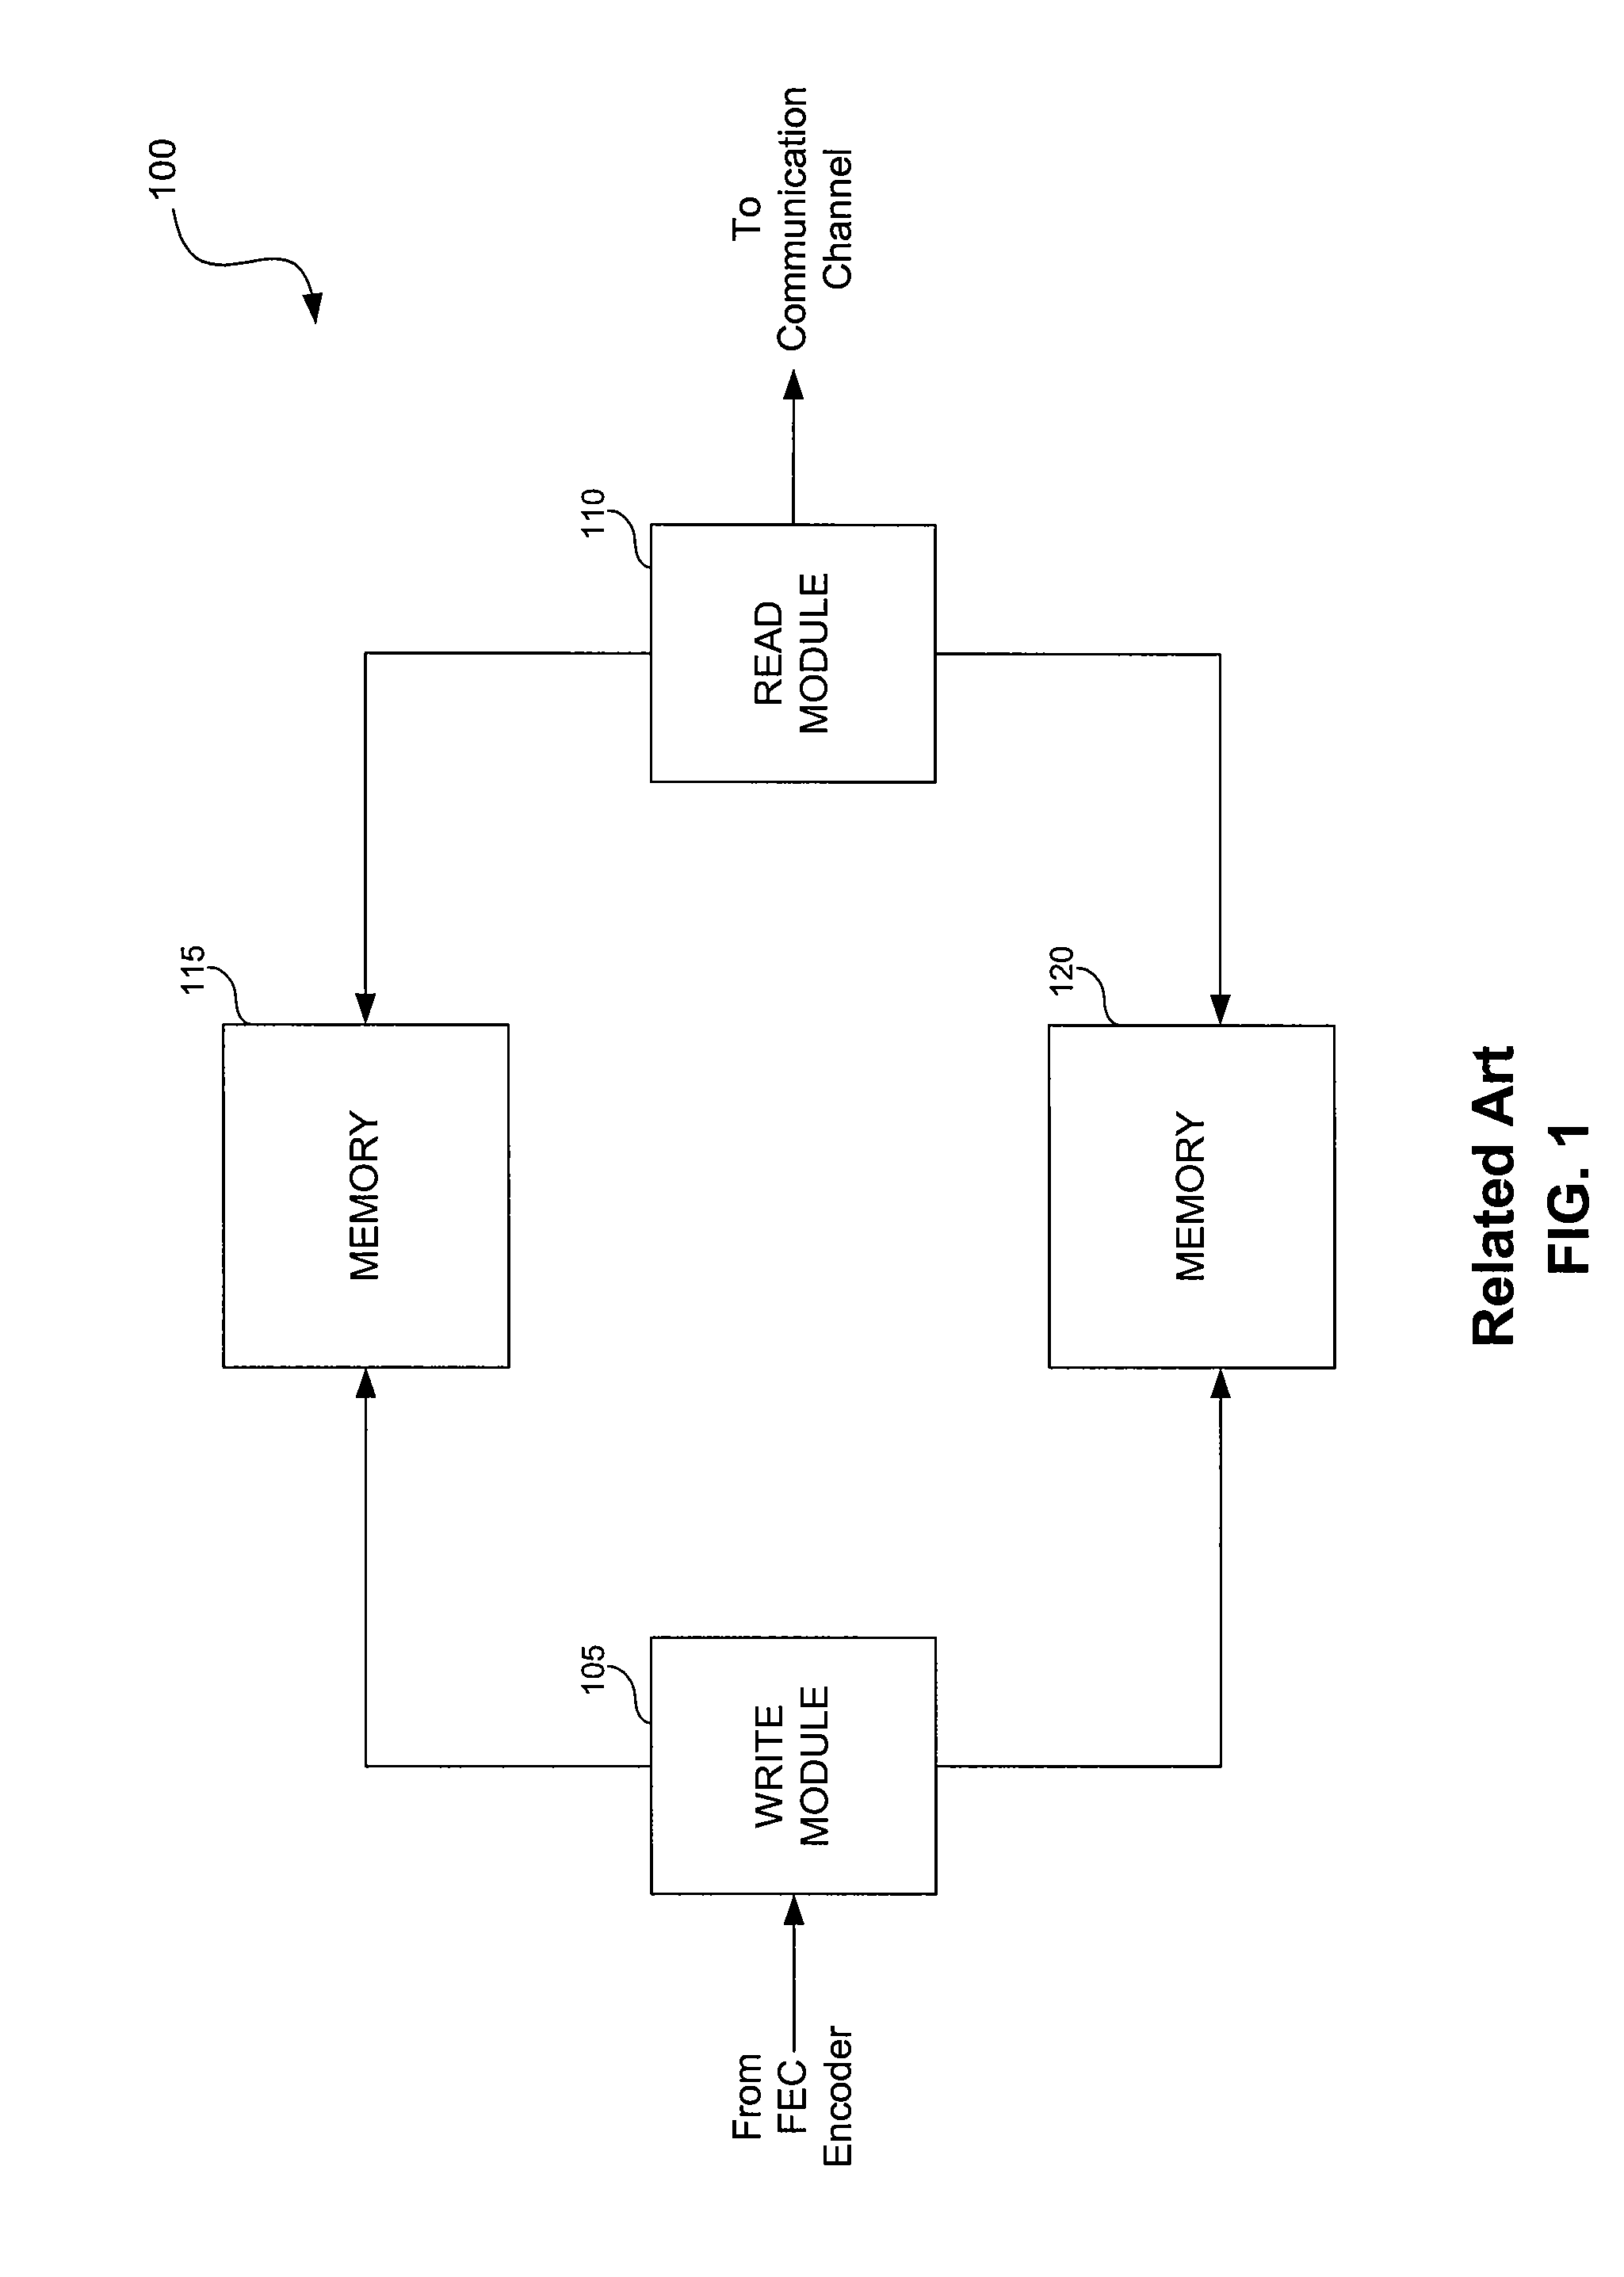 System and Method for Interleaving Data in a Communication Device